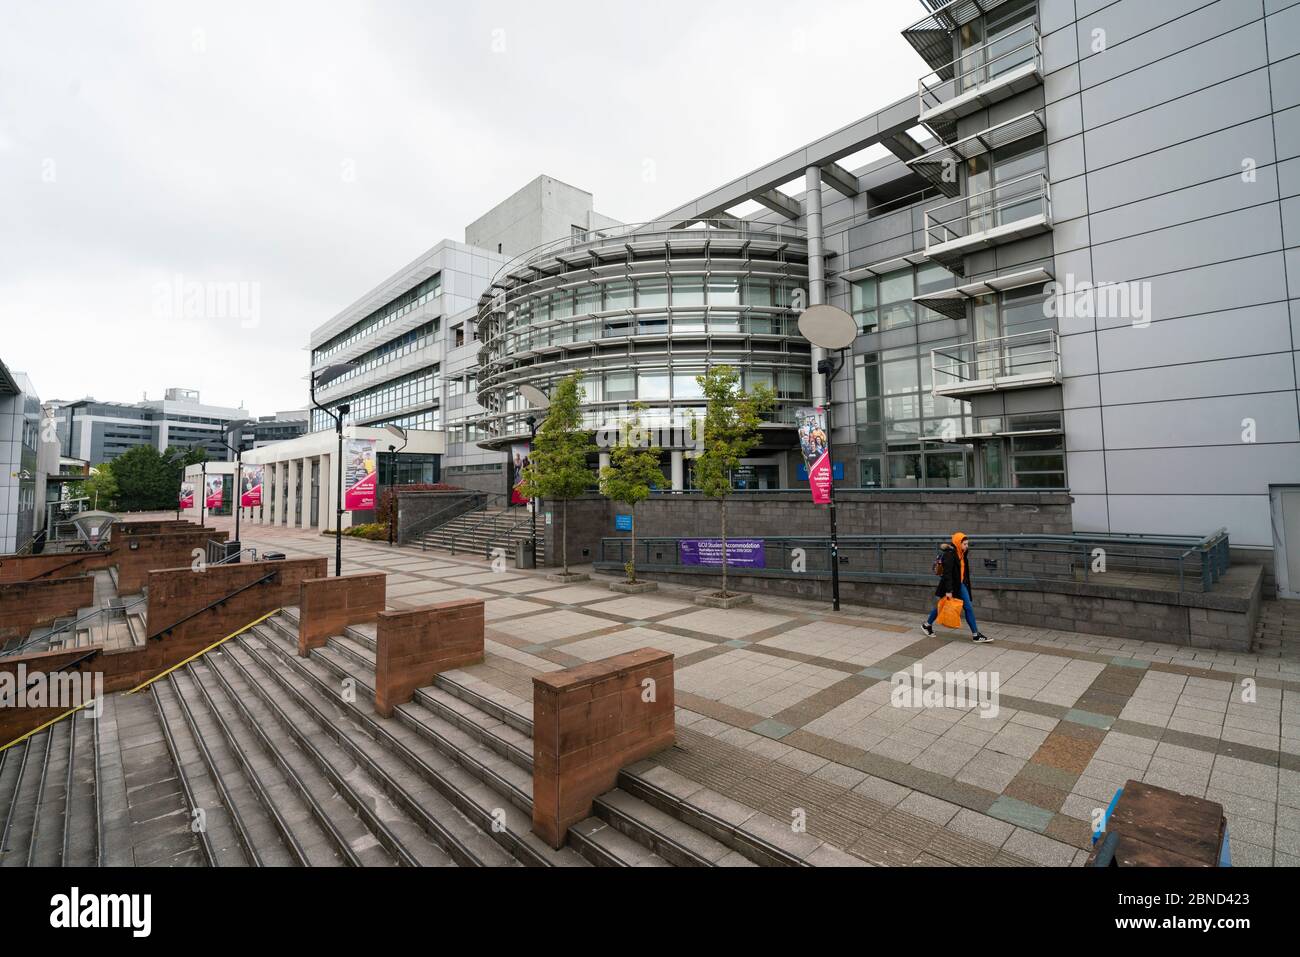 Glasgow, Scotland, UK. 14 May 2020.  With Scotland still in Covid-19 lockdown the city centre of Glasgow remains deserted with with few members of the public on the streets and shops, offices and restaurants closed. Pictured; Campus of Glasgow Caledonian University is deserted. Iain Masterton/Alamy Live News Stock Photo